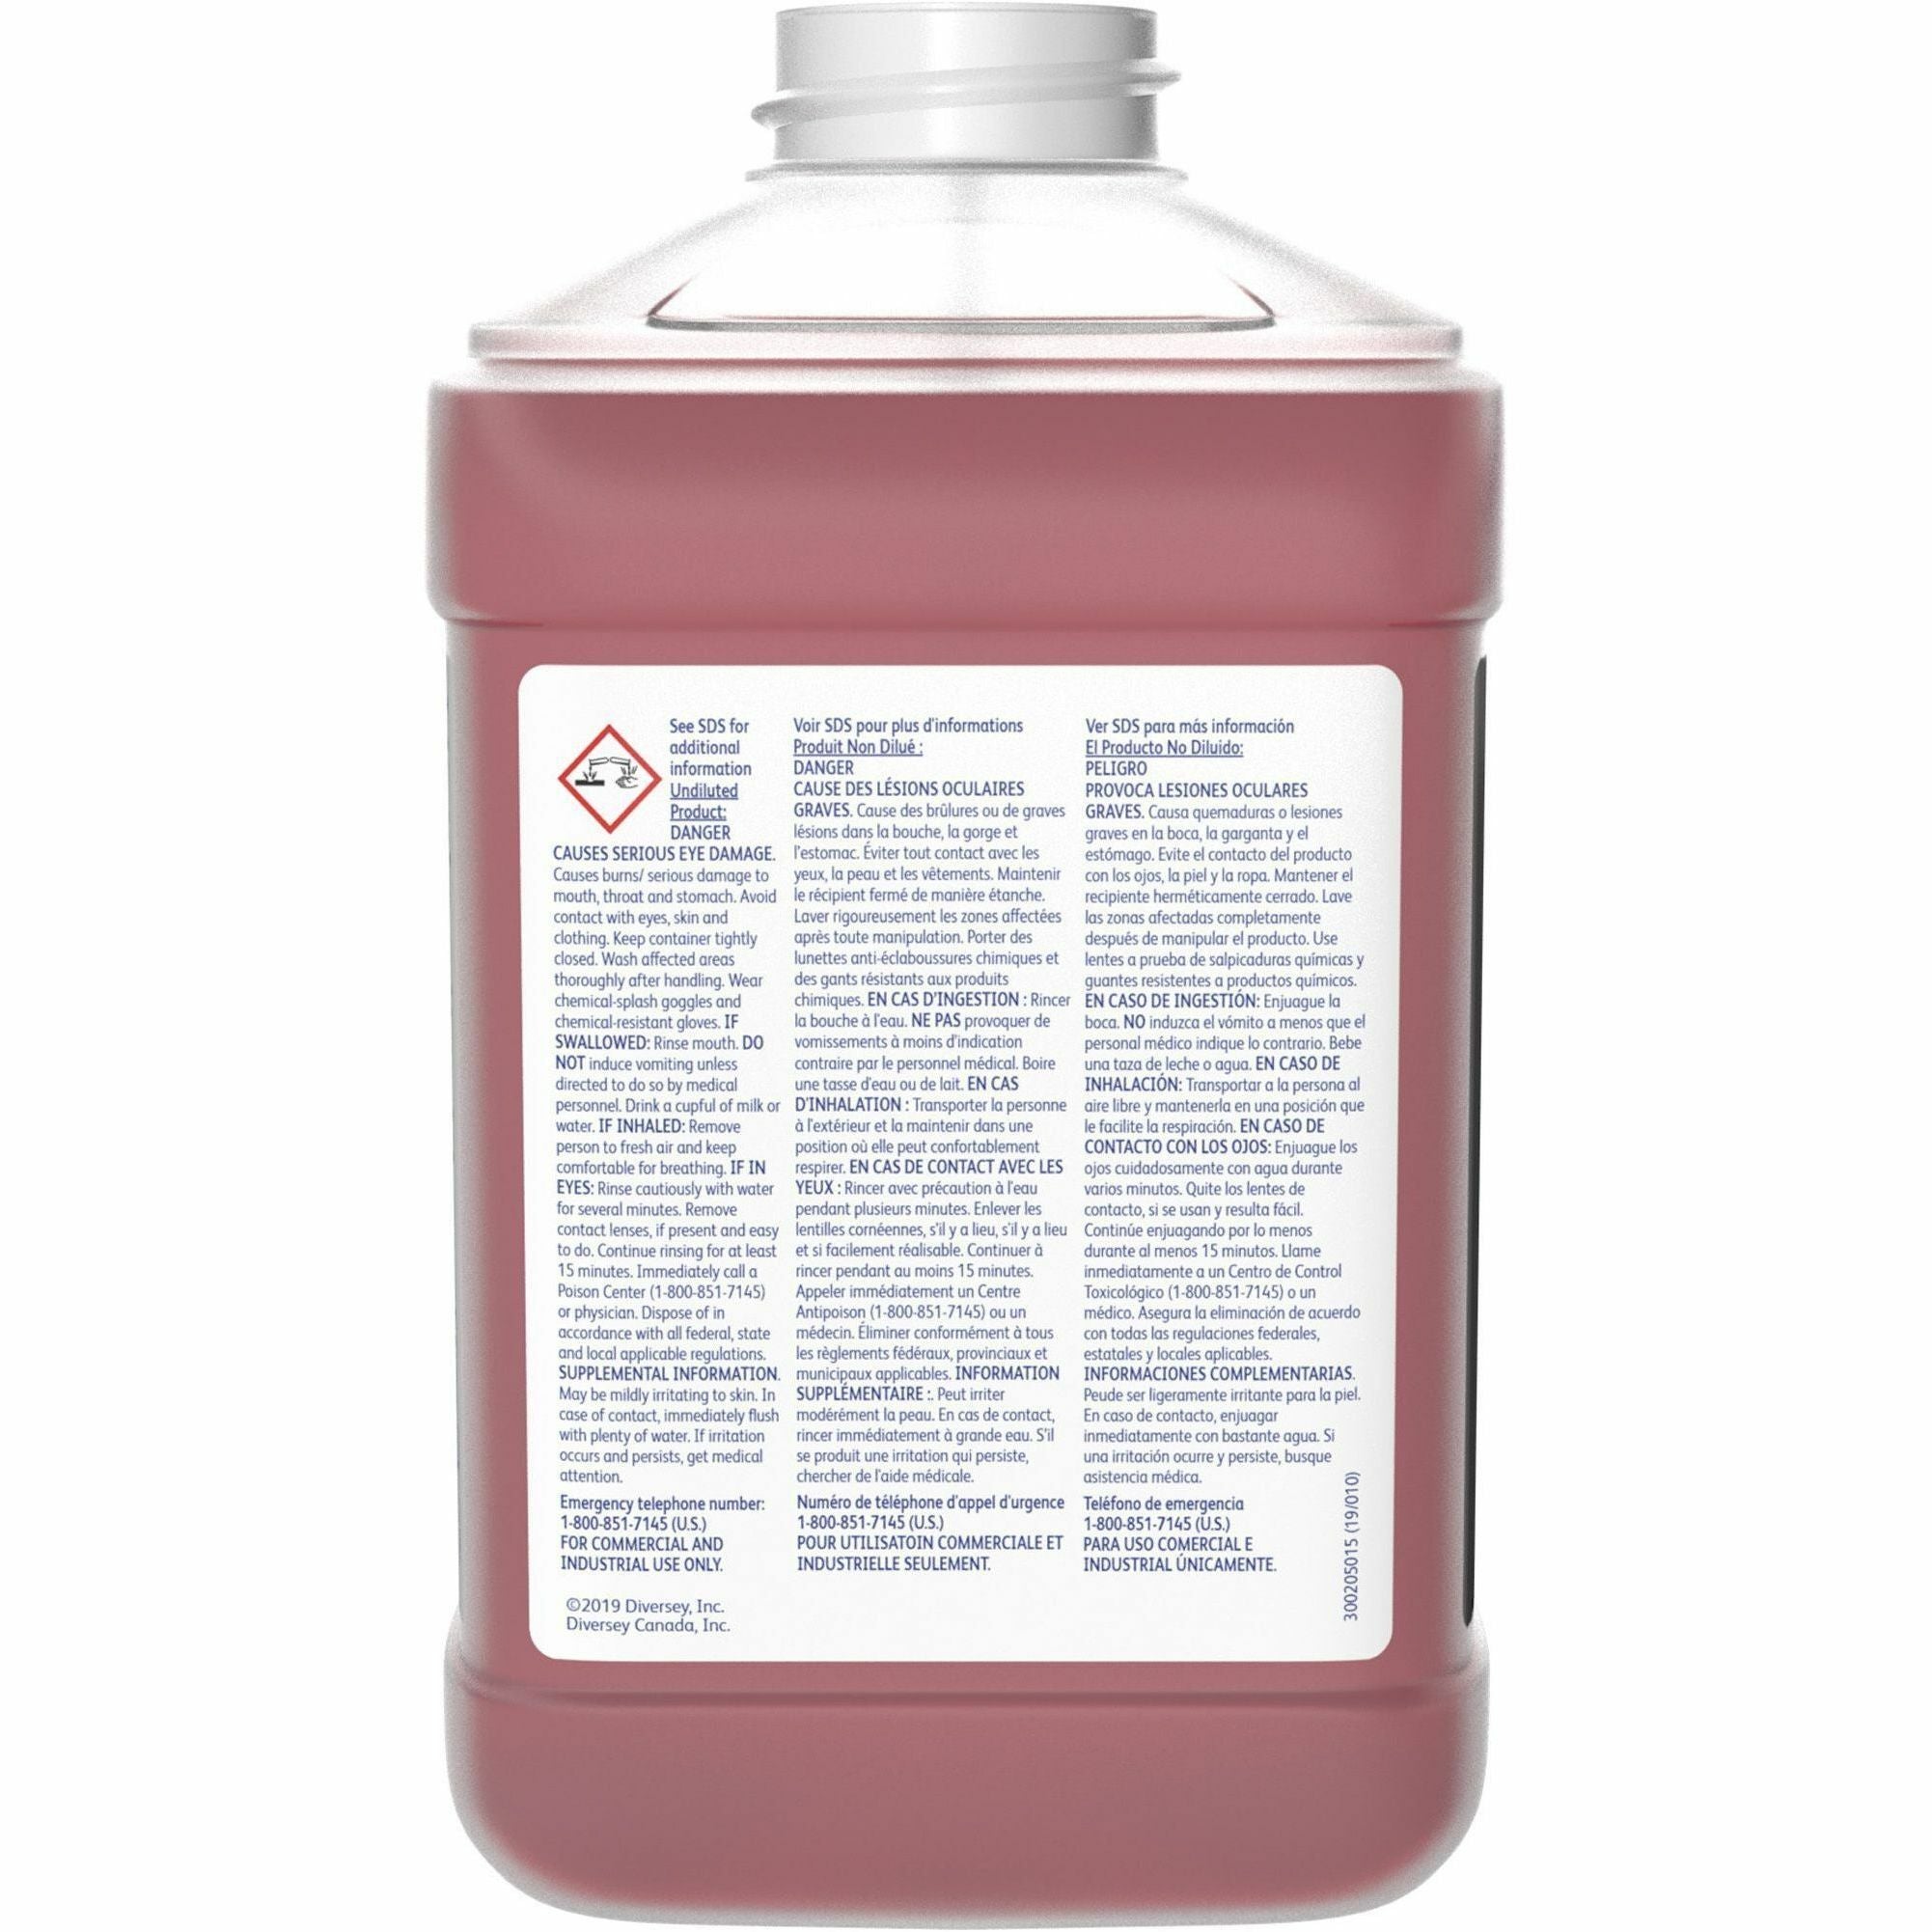 diversey-stride-floral-hc-neutral-cleaner-concentrate-845-fl-oz-26-quart-floral-scent-2-carton-rinse-free-non-alkaline-film-free-low-foaming-pleasant-scent-kosher-red_dvo904717 - 5